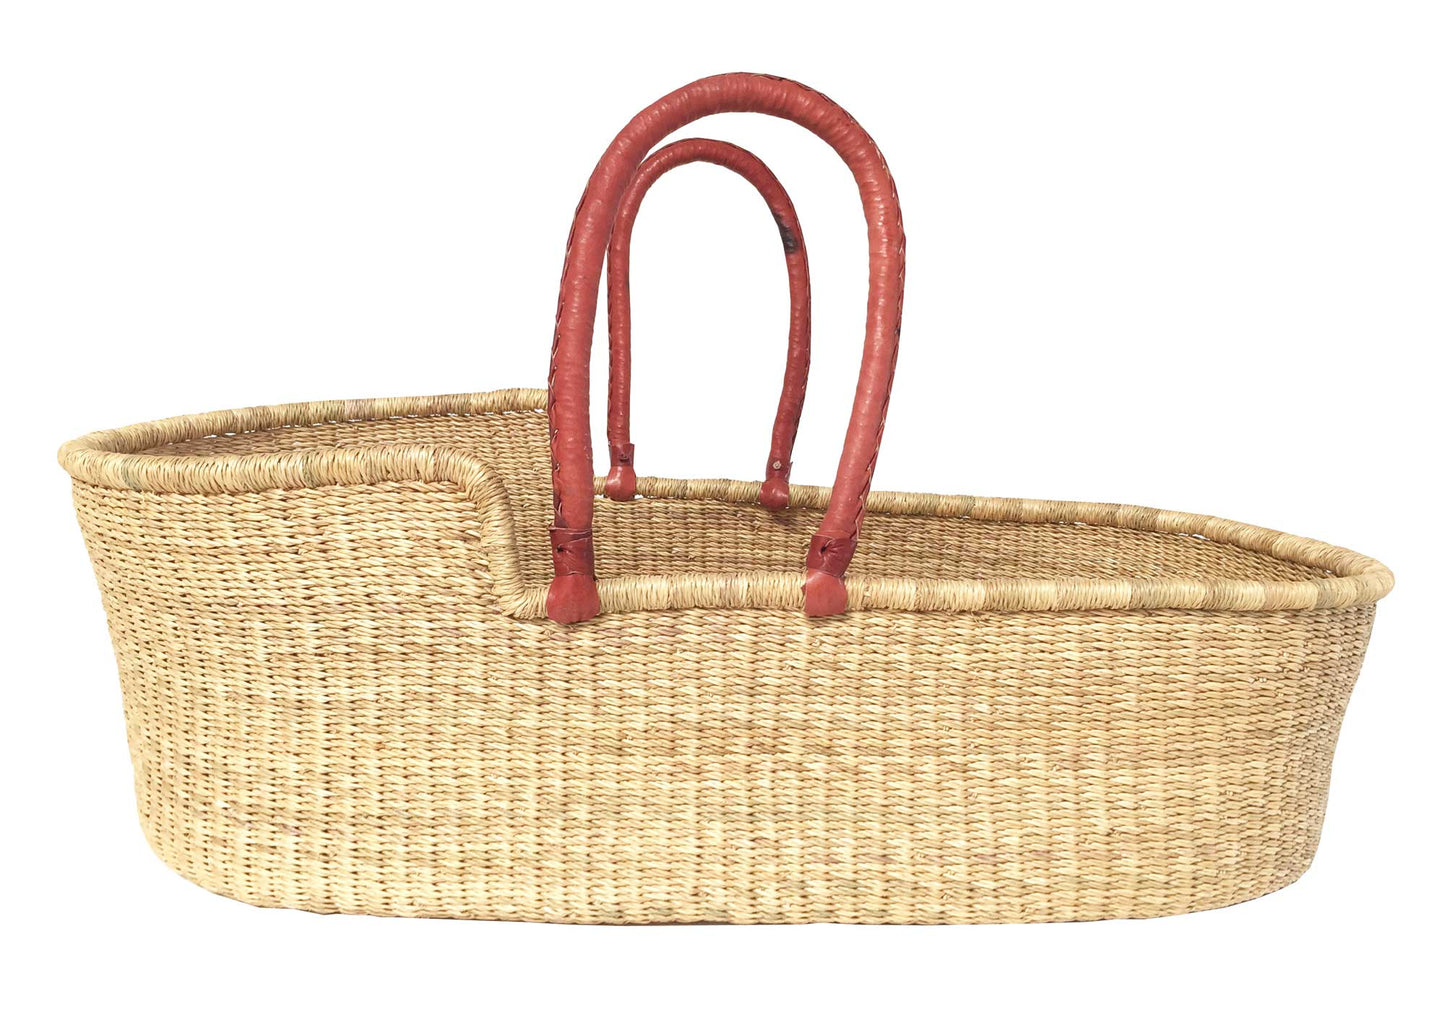 African Styled Moses Basket Hand Woven in Ghana - Reddish Brown Leather Handle